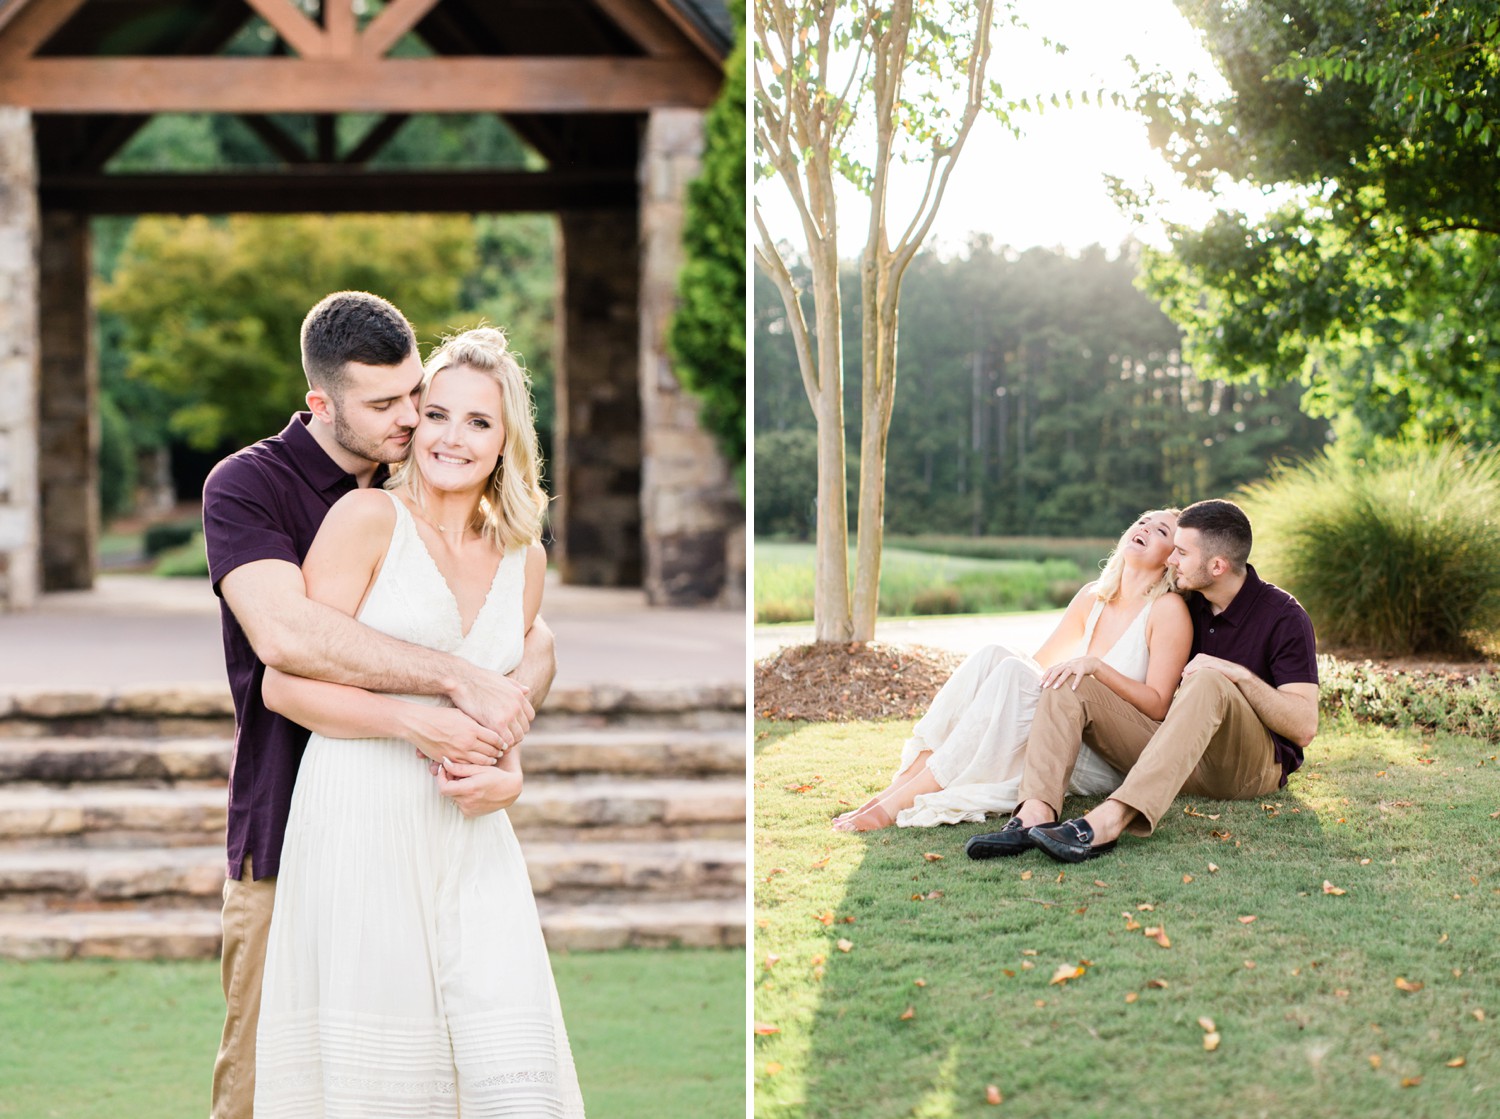 He made her feel safe, he made her laugh. LOVED capturing all these emotions!